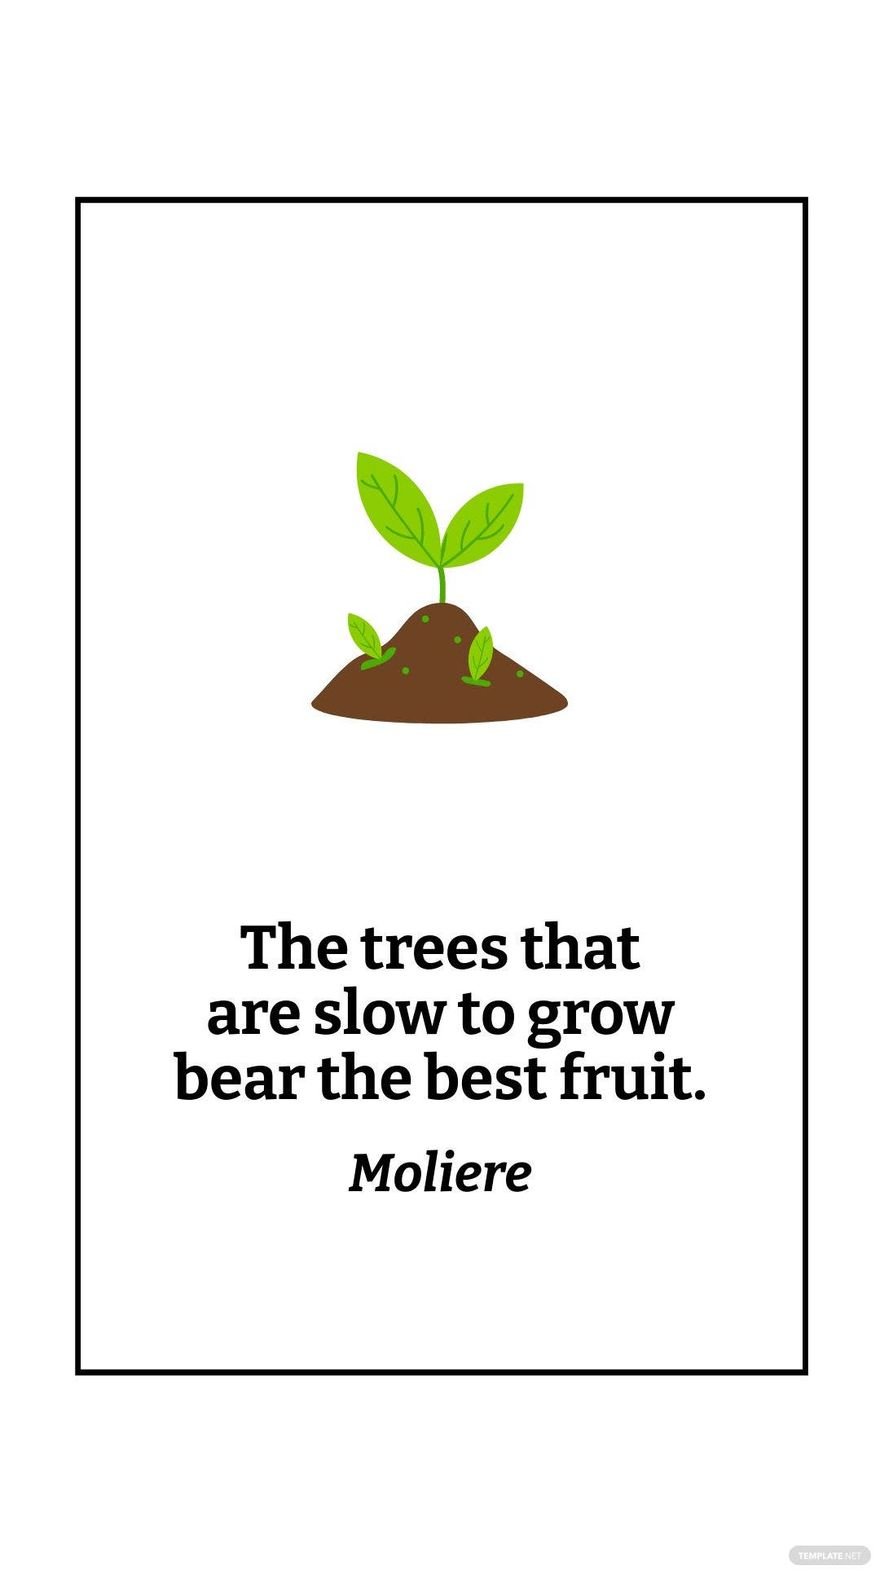 Moliere - The trees that are slow to grow bear the best fruit.